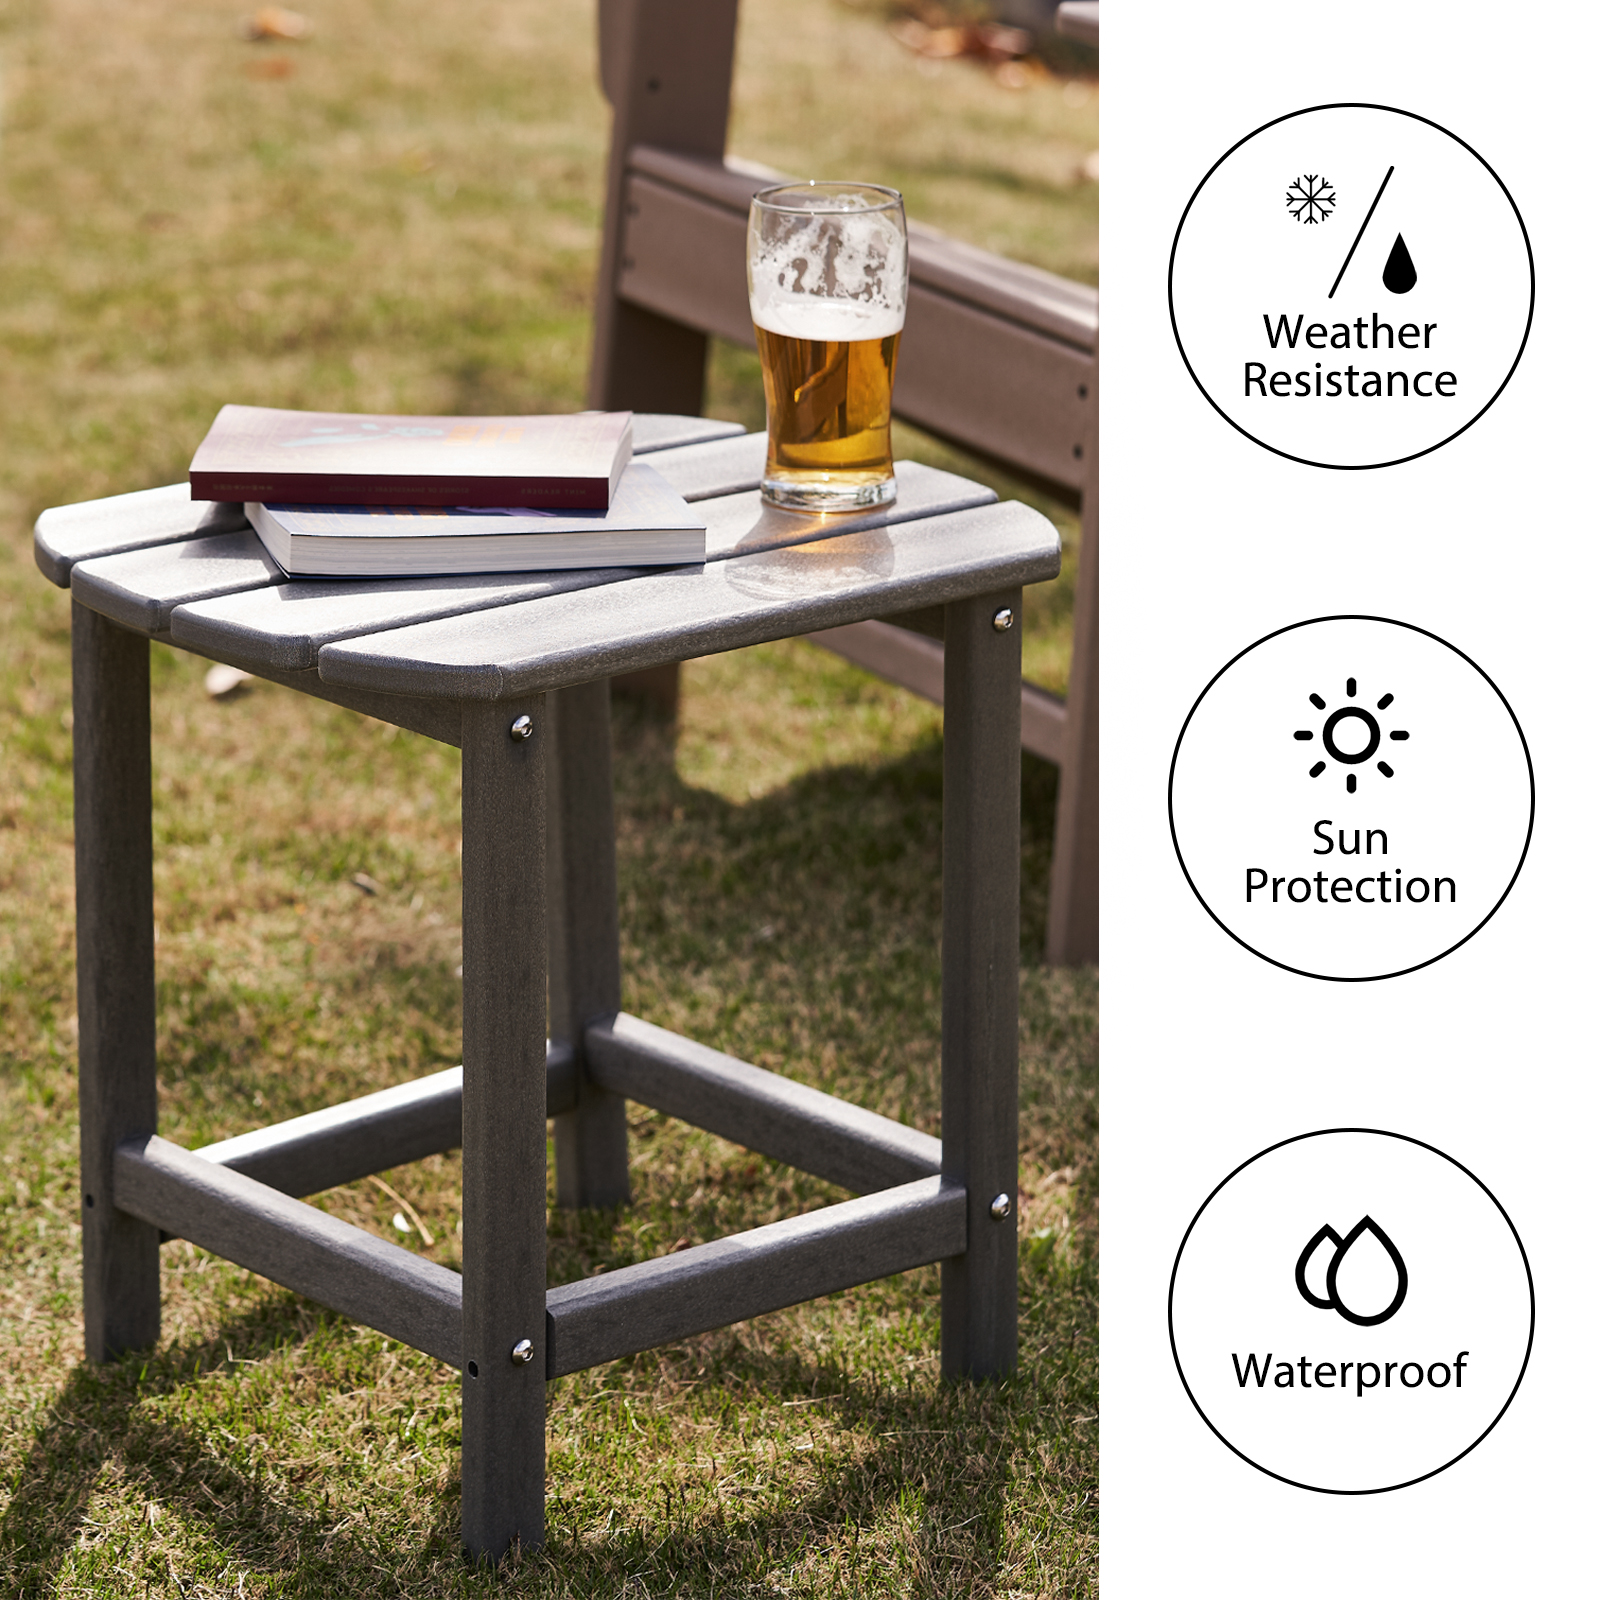 DAILYLIFE Plastic Outdoor Side Table, Patio End Table Weather Resistant, Coffee Table for Your Adirondack Chair, Patio Deck Garden, Backyard & Lawn Furniture (Slate Gray) - image 4 of 8